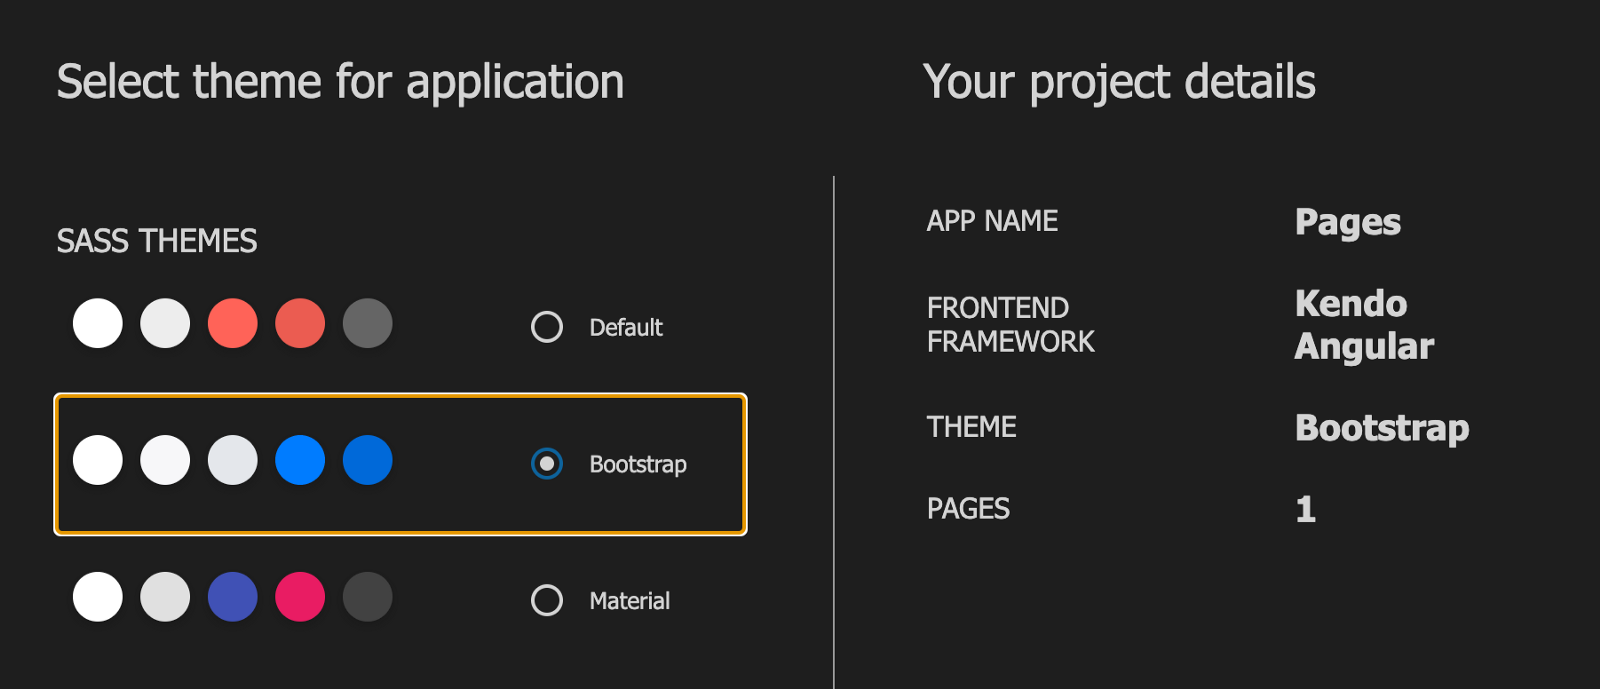 Select theme for application. We have chosen Bootstrap; other options include Default or Material. Your project details: App name - Pages; Frontend framework - Kendo Angular; Theme - Bootstrap; Pages - 1.